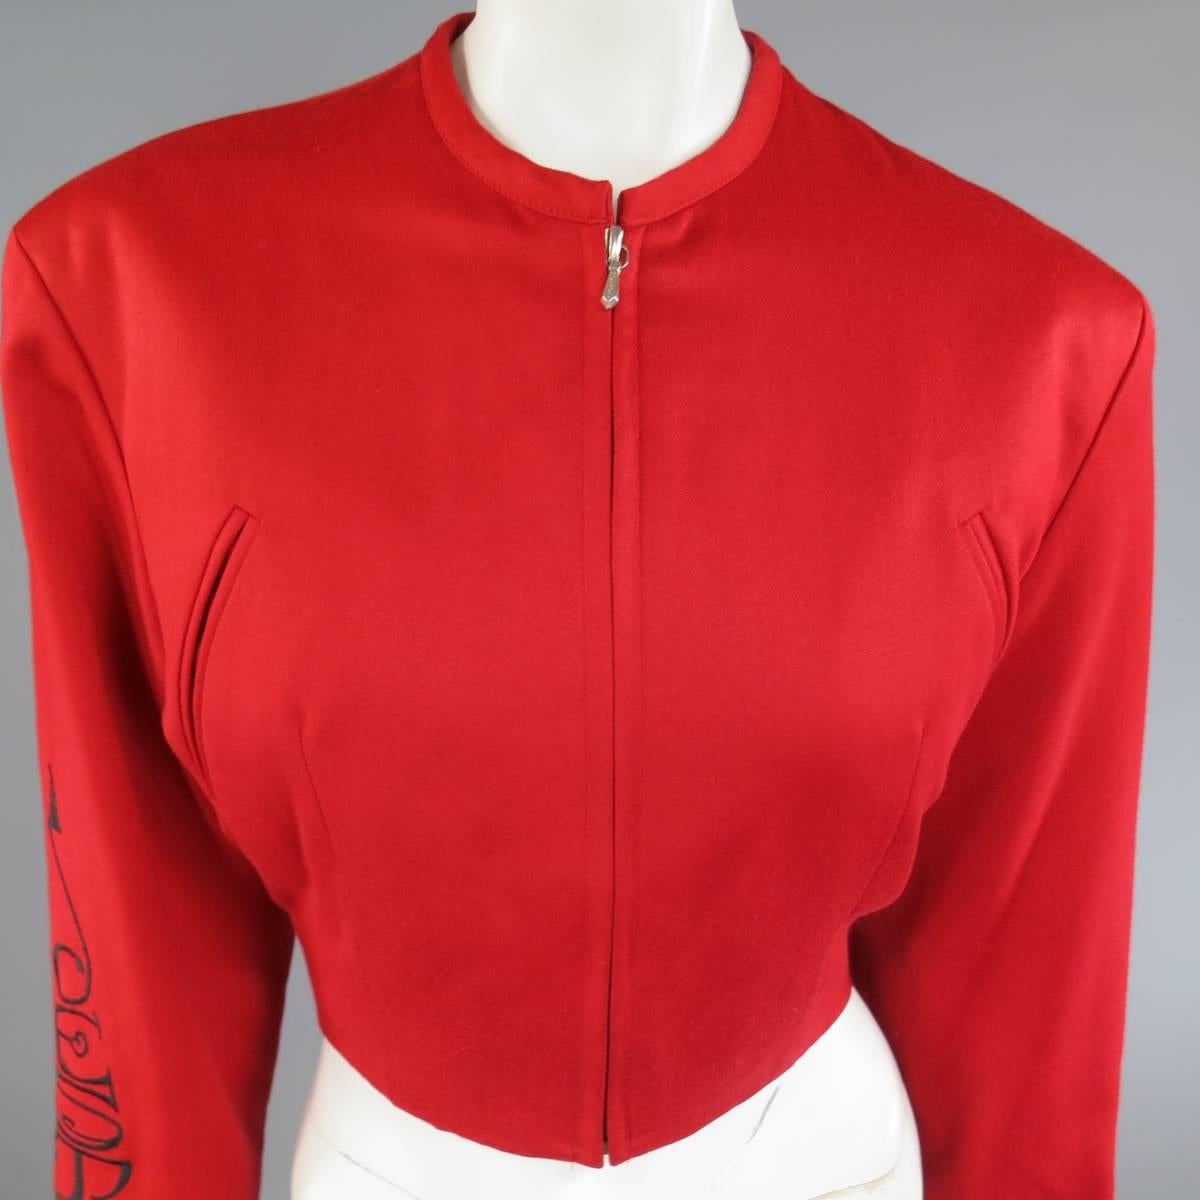 Vintage JOHN RICHMOND cropped jacket in a red wool with a high neck, hidden zip closure, double slanted breast pockets, elastic back hem, and embroidered 